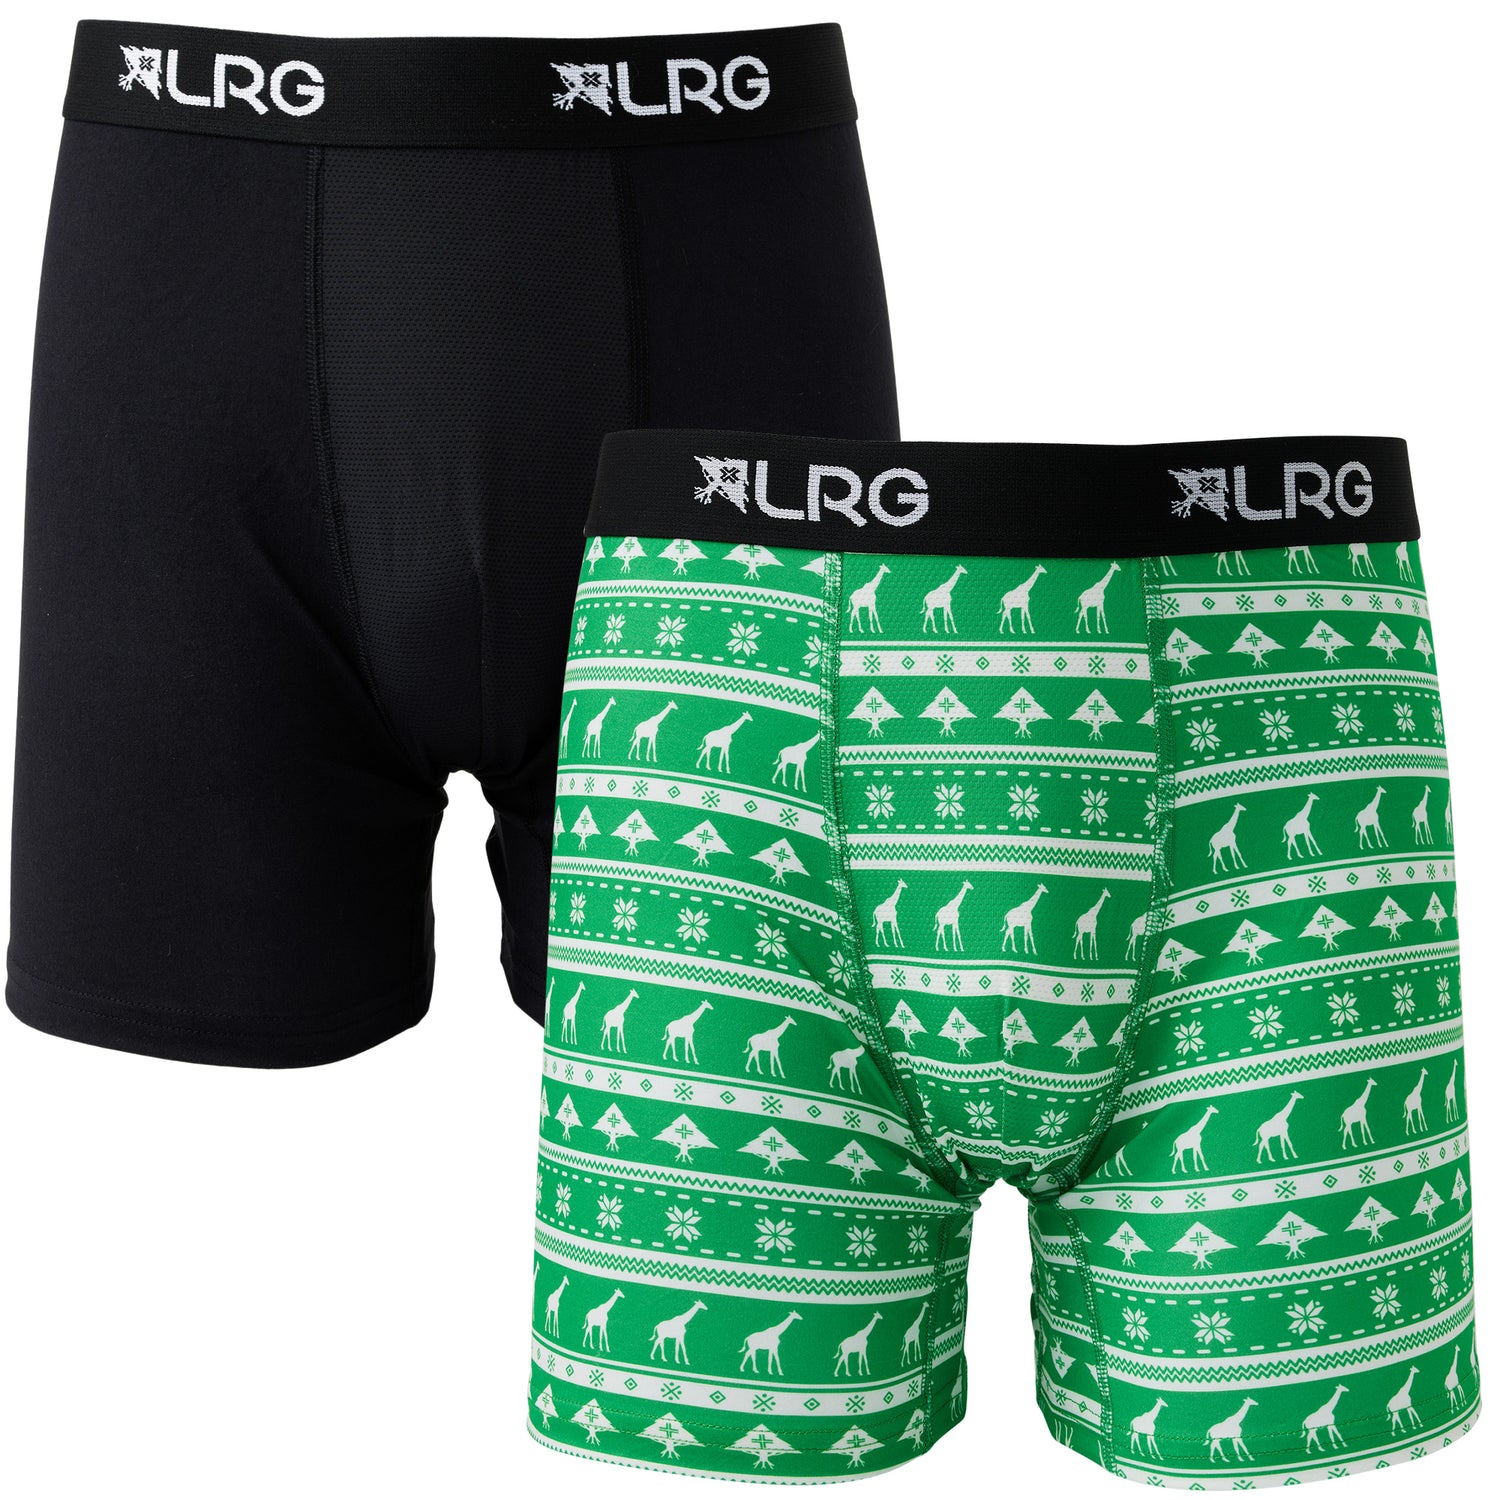 HOLIDAY BOXER BRIEFS 2 PACK - MULTI